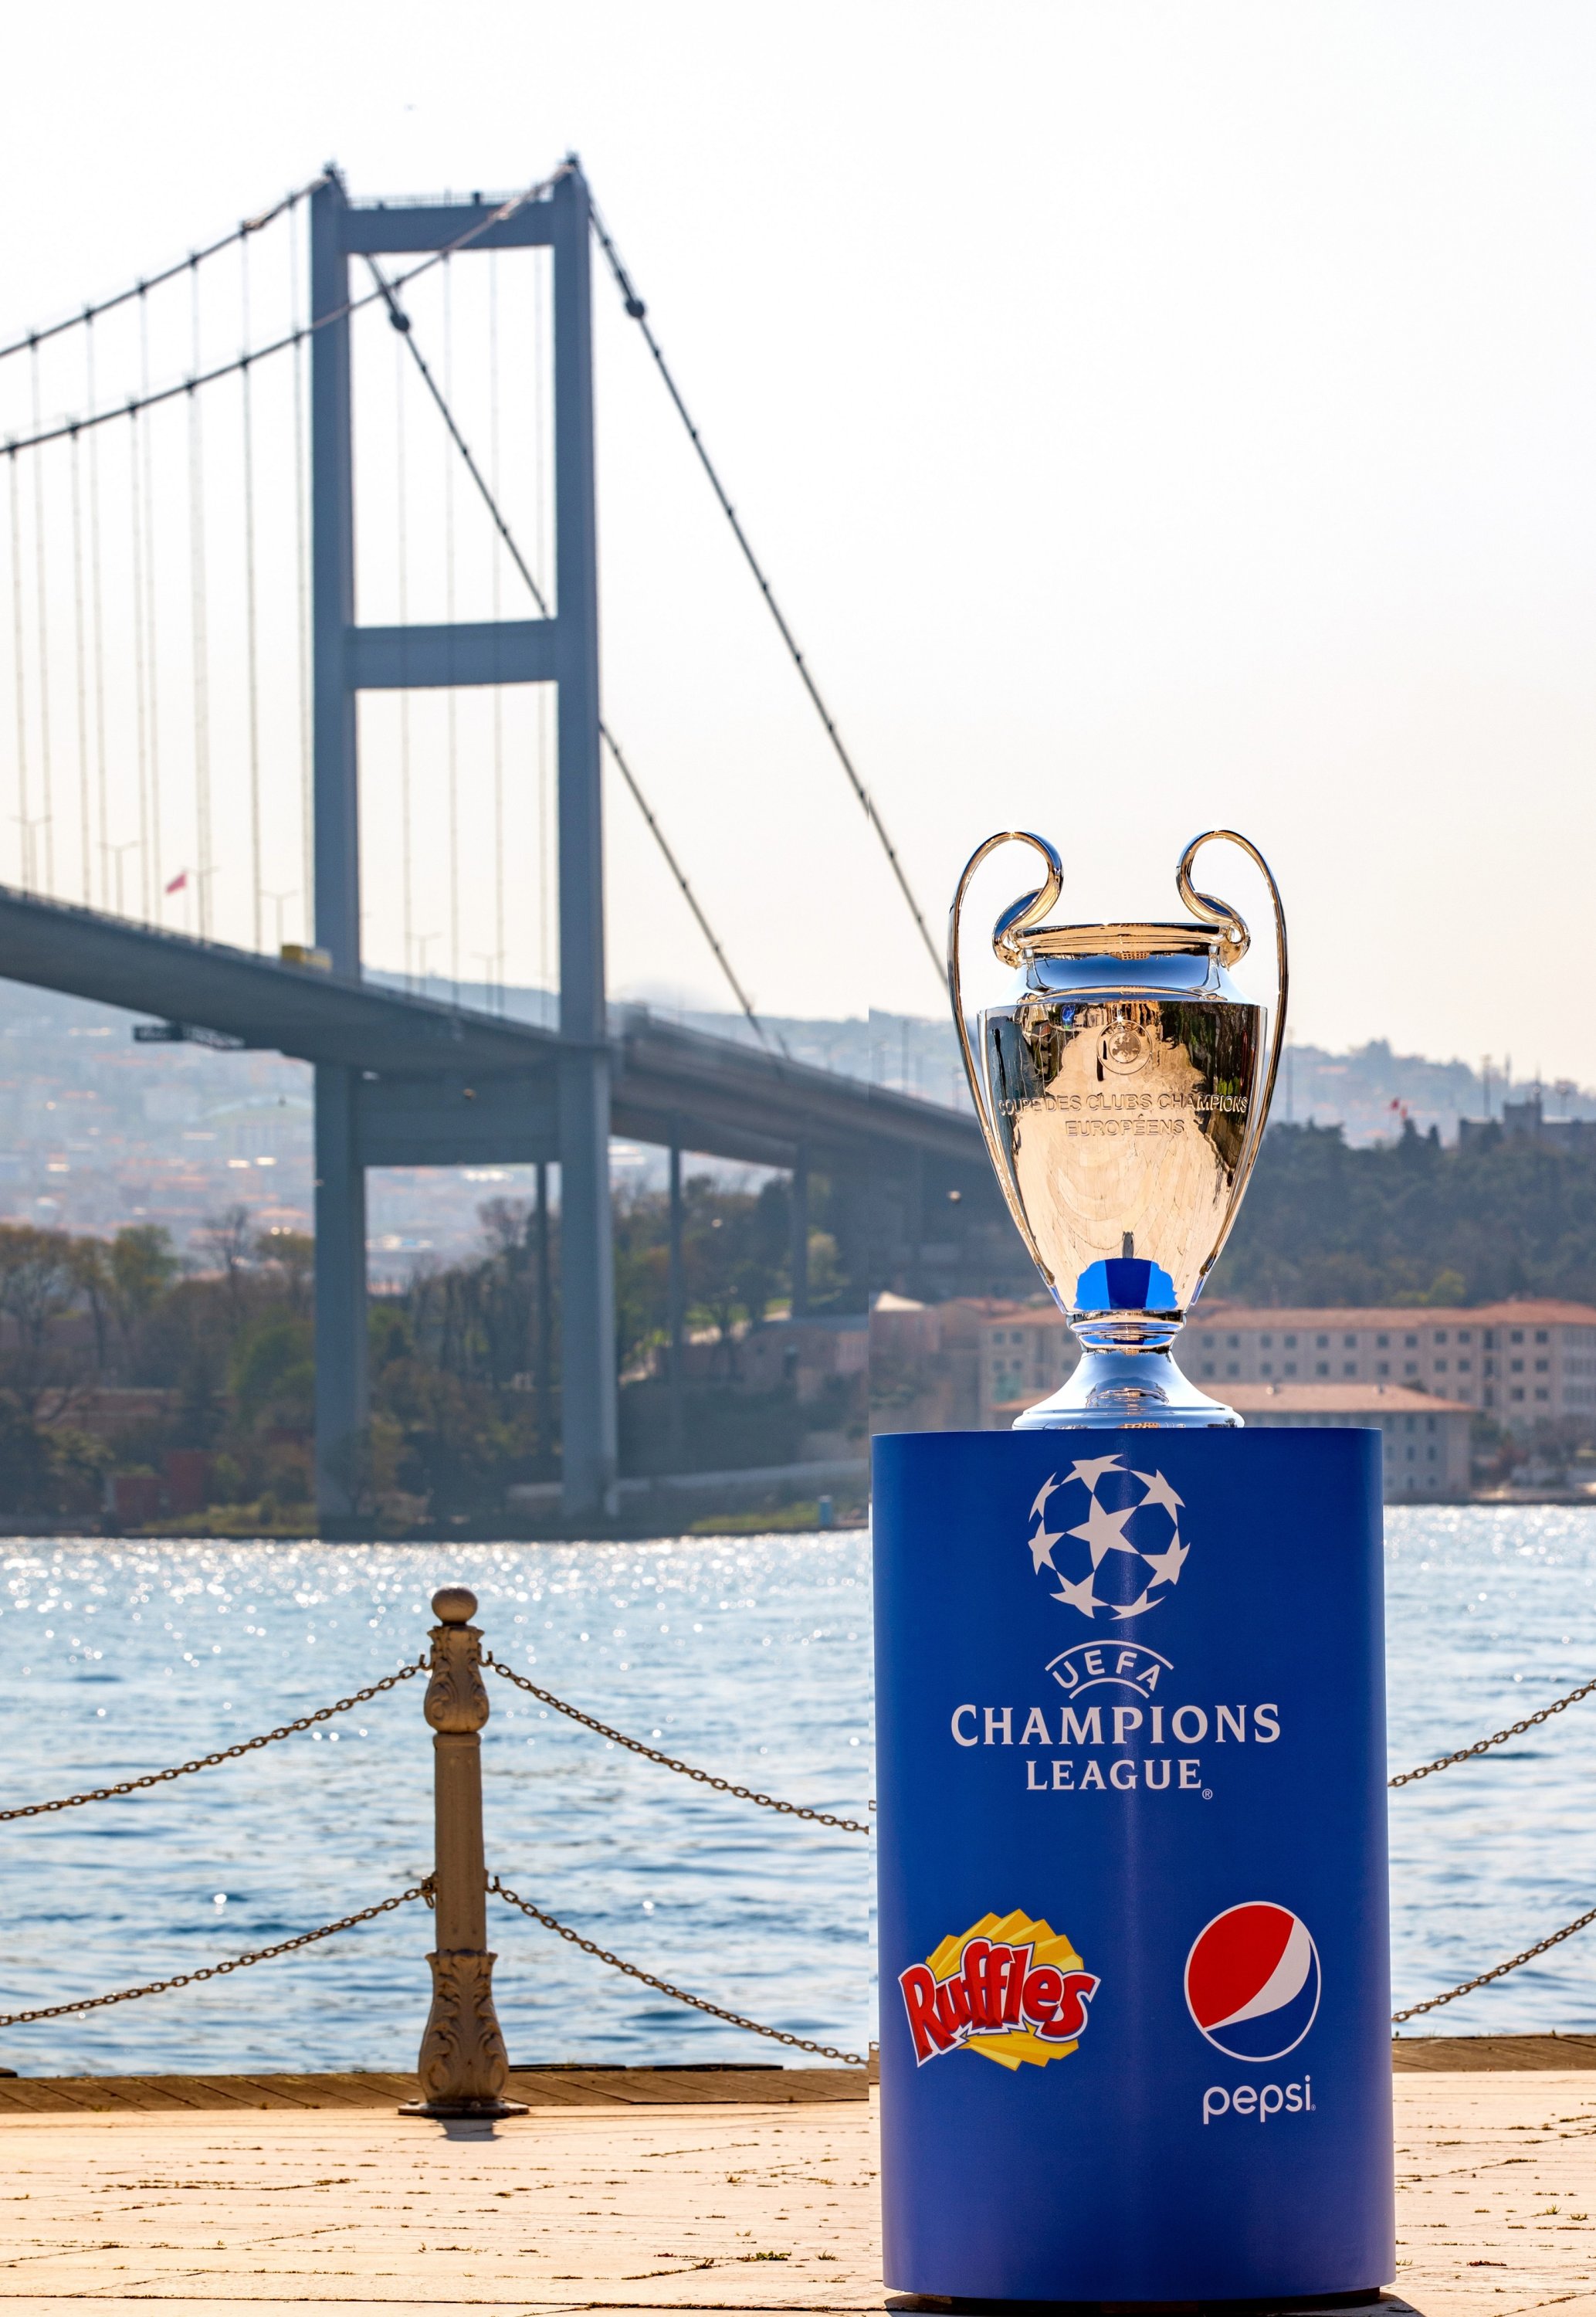 Istanbul To Host Champions League Final In 23 On Turkey S Centenary Daily Sabah